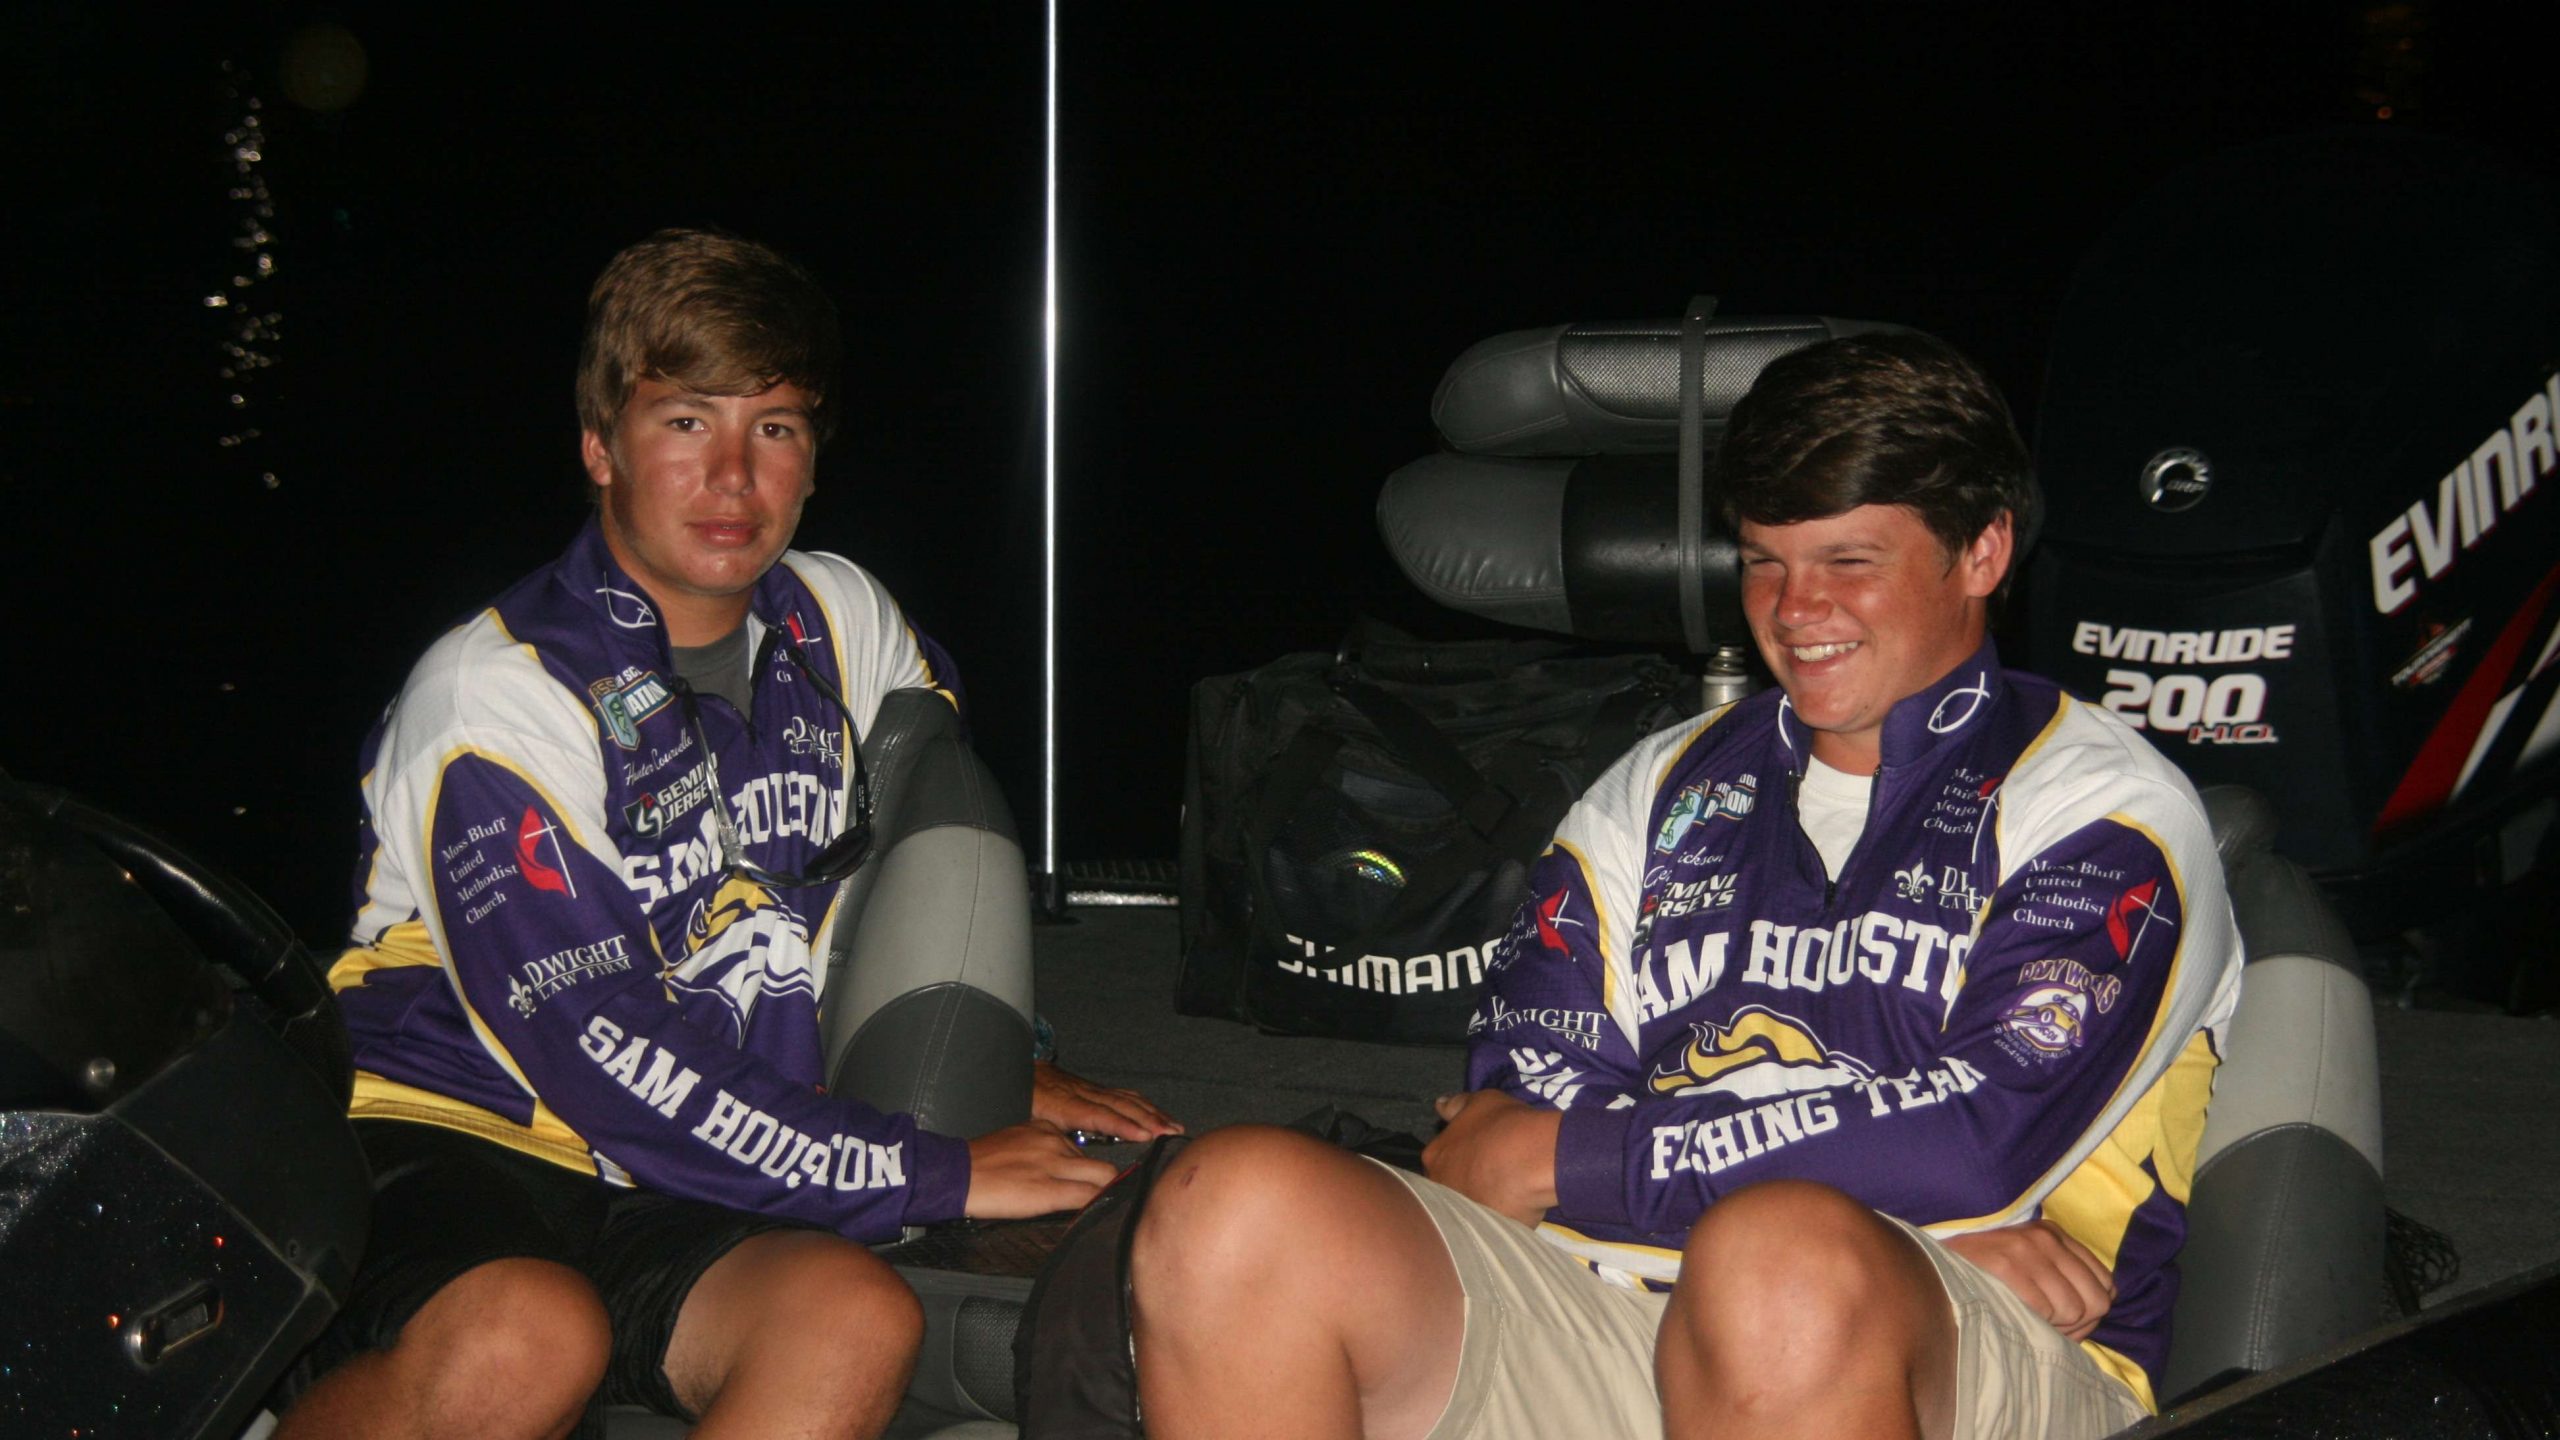 Sam Houston High anglers Hunter Courville and Alex Erickson wait patiently for the start of the tournament. 